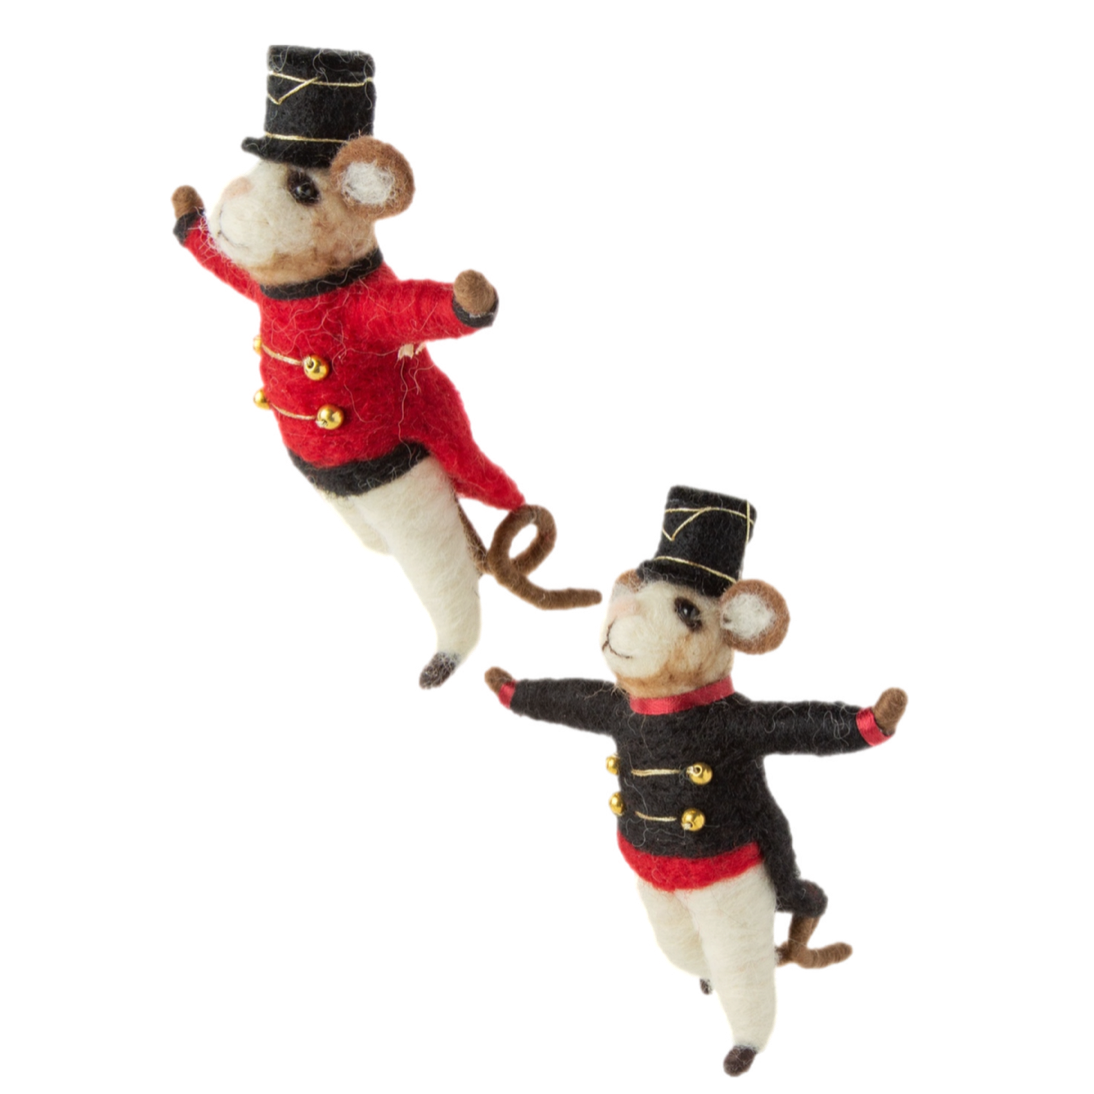 Assorted Mouse Nutcracker Ornament, INDIVIDUALLY SOLD